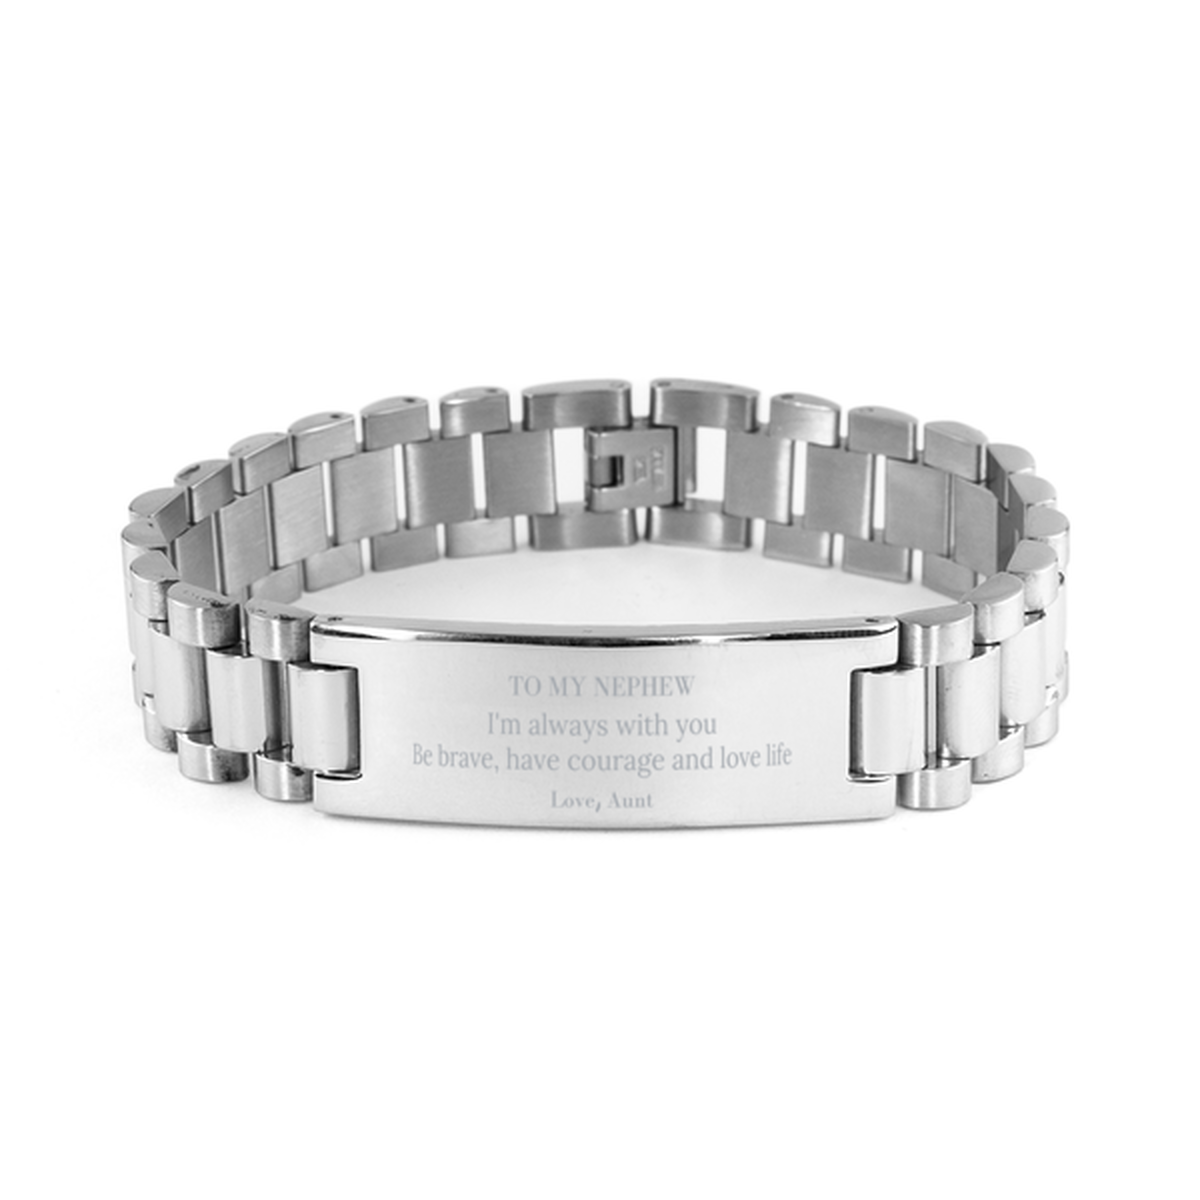 To My Nephew Gifts from Aunt, Unique Ladder Stainless Steel Bracelet Inspirational Christmas Birthday Graduation Gifts for Nephew I'm always with you. Be brave, have courage and love life. Love, Aunt